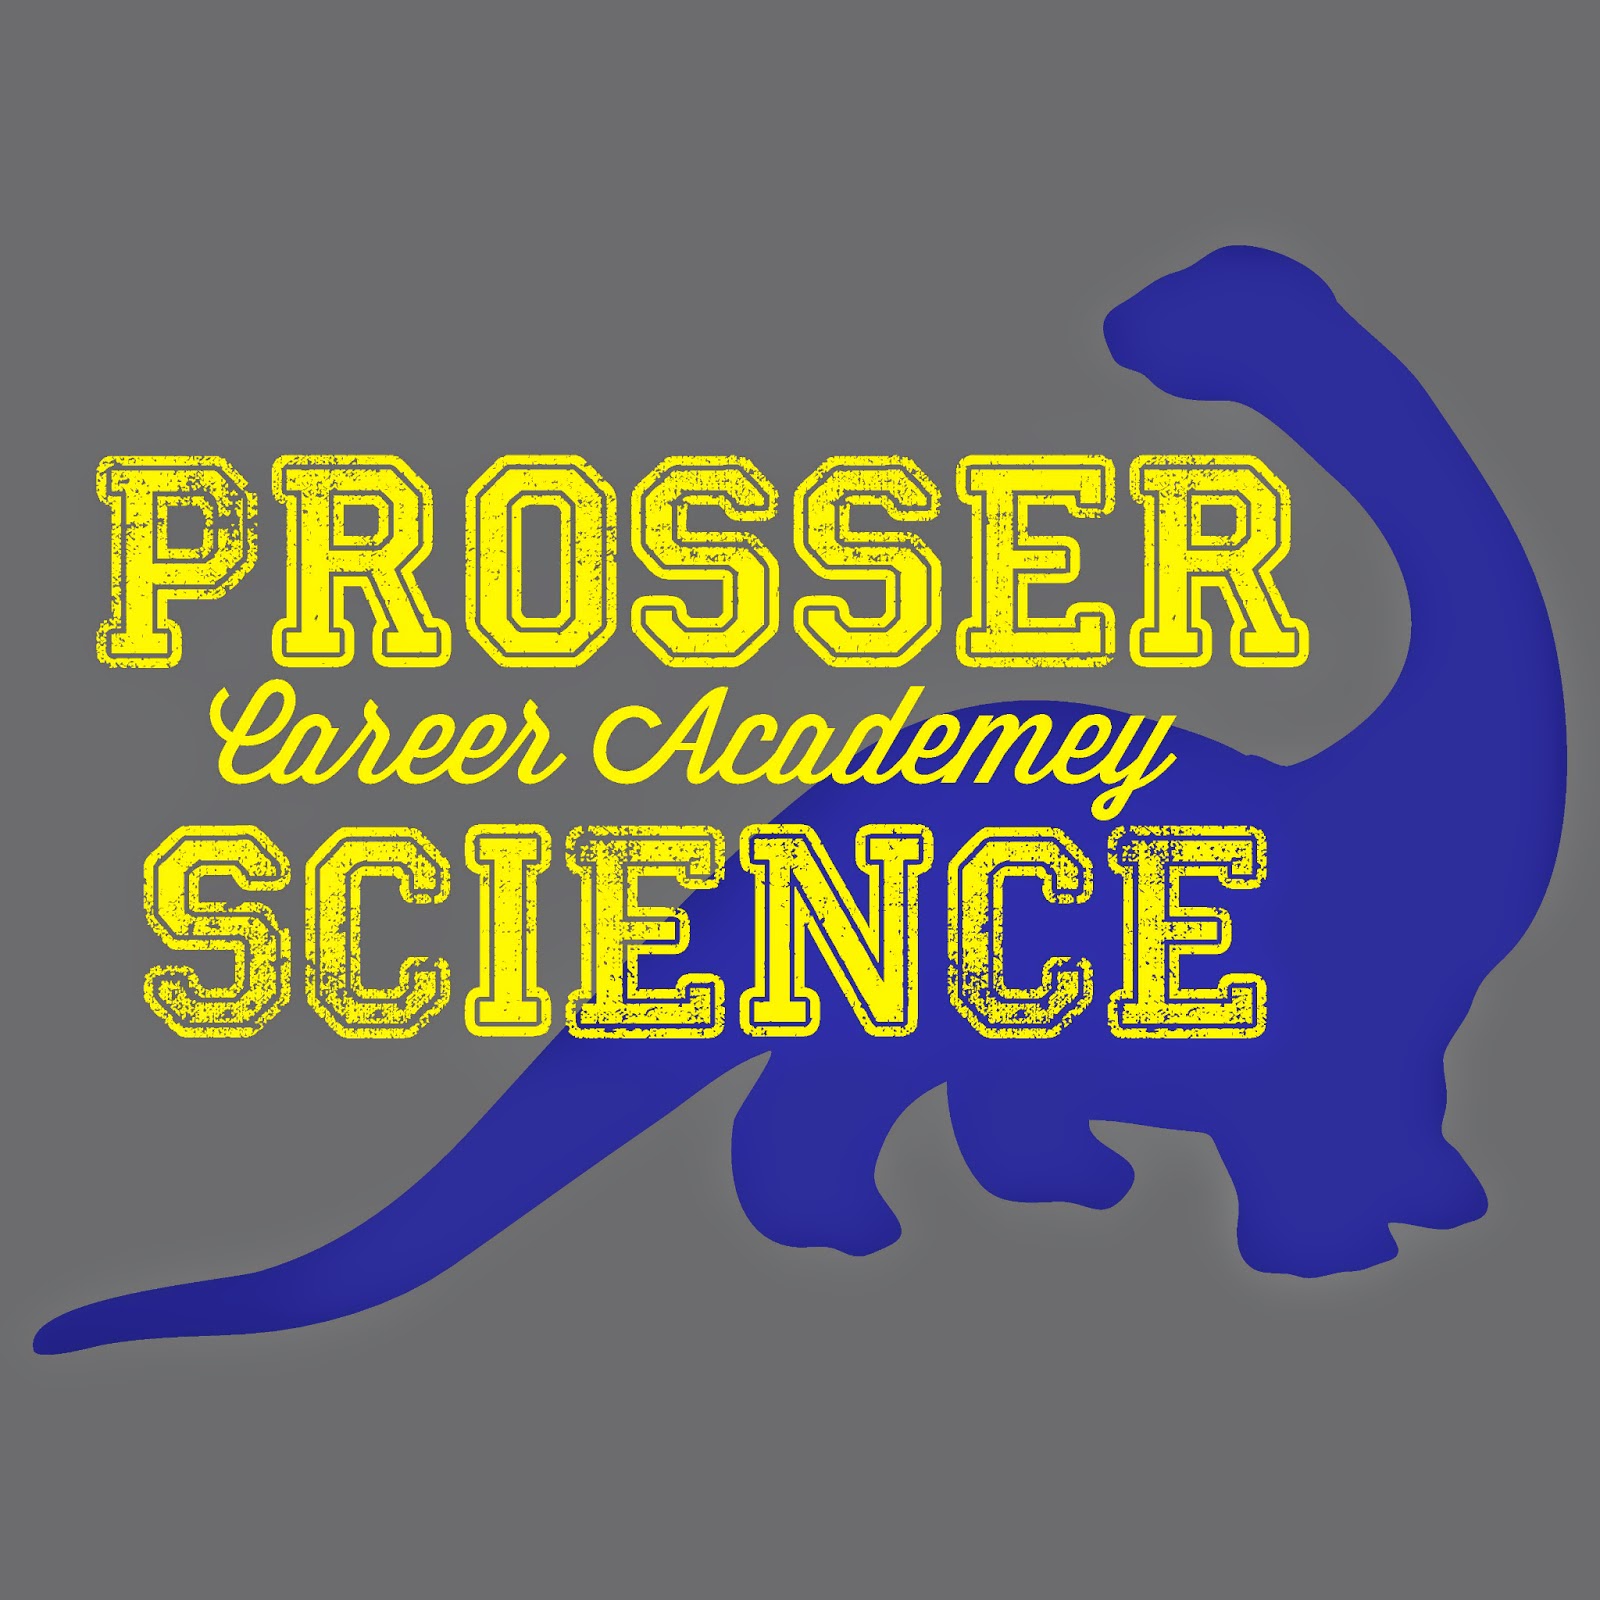 Prosser Science Podcasts